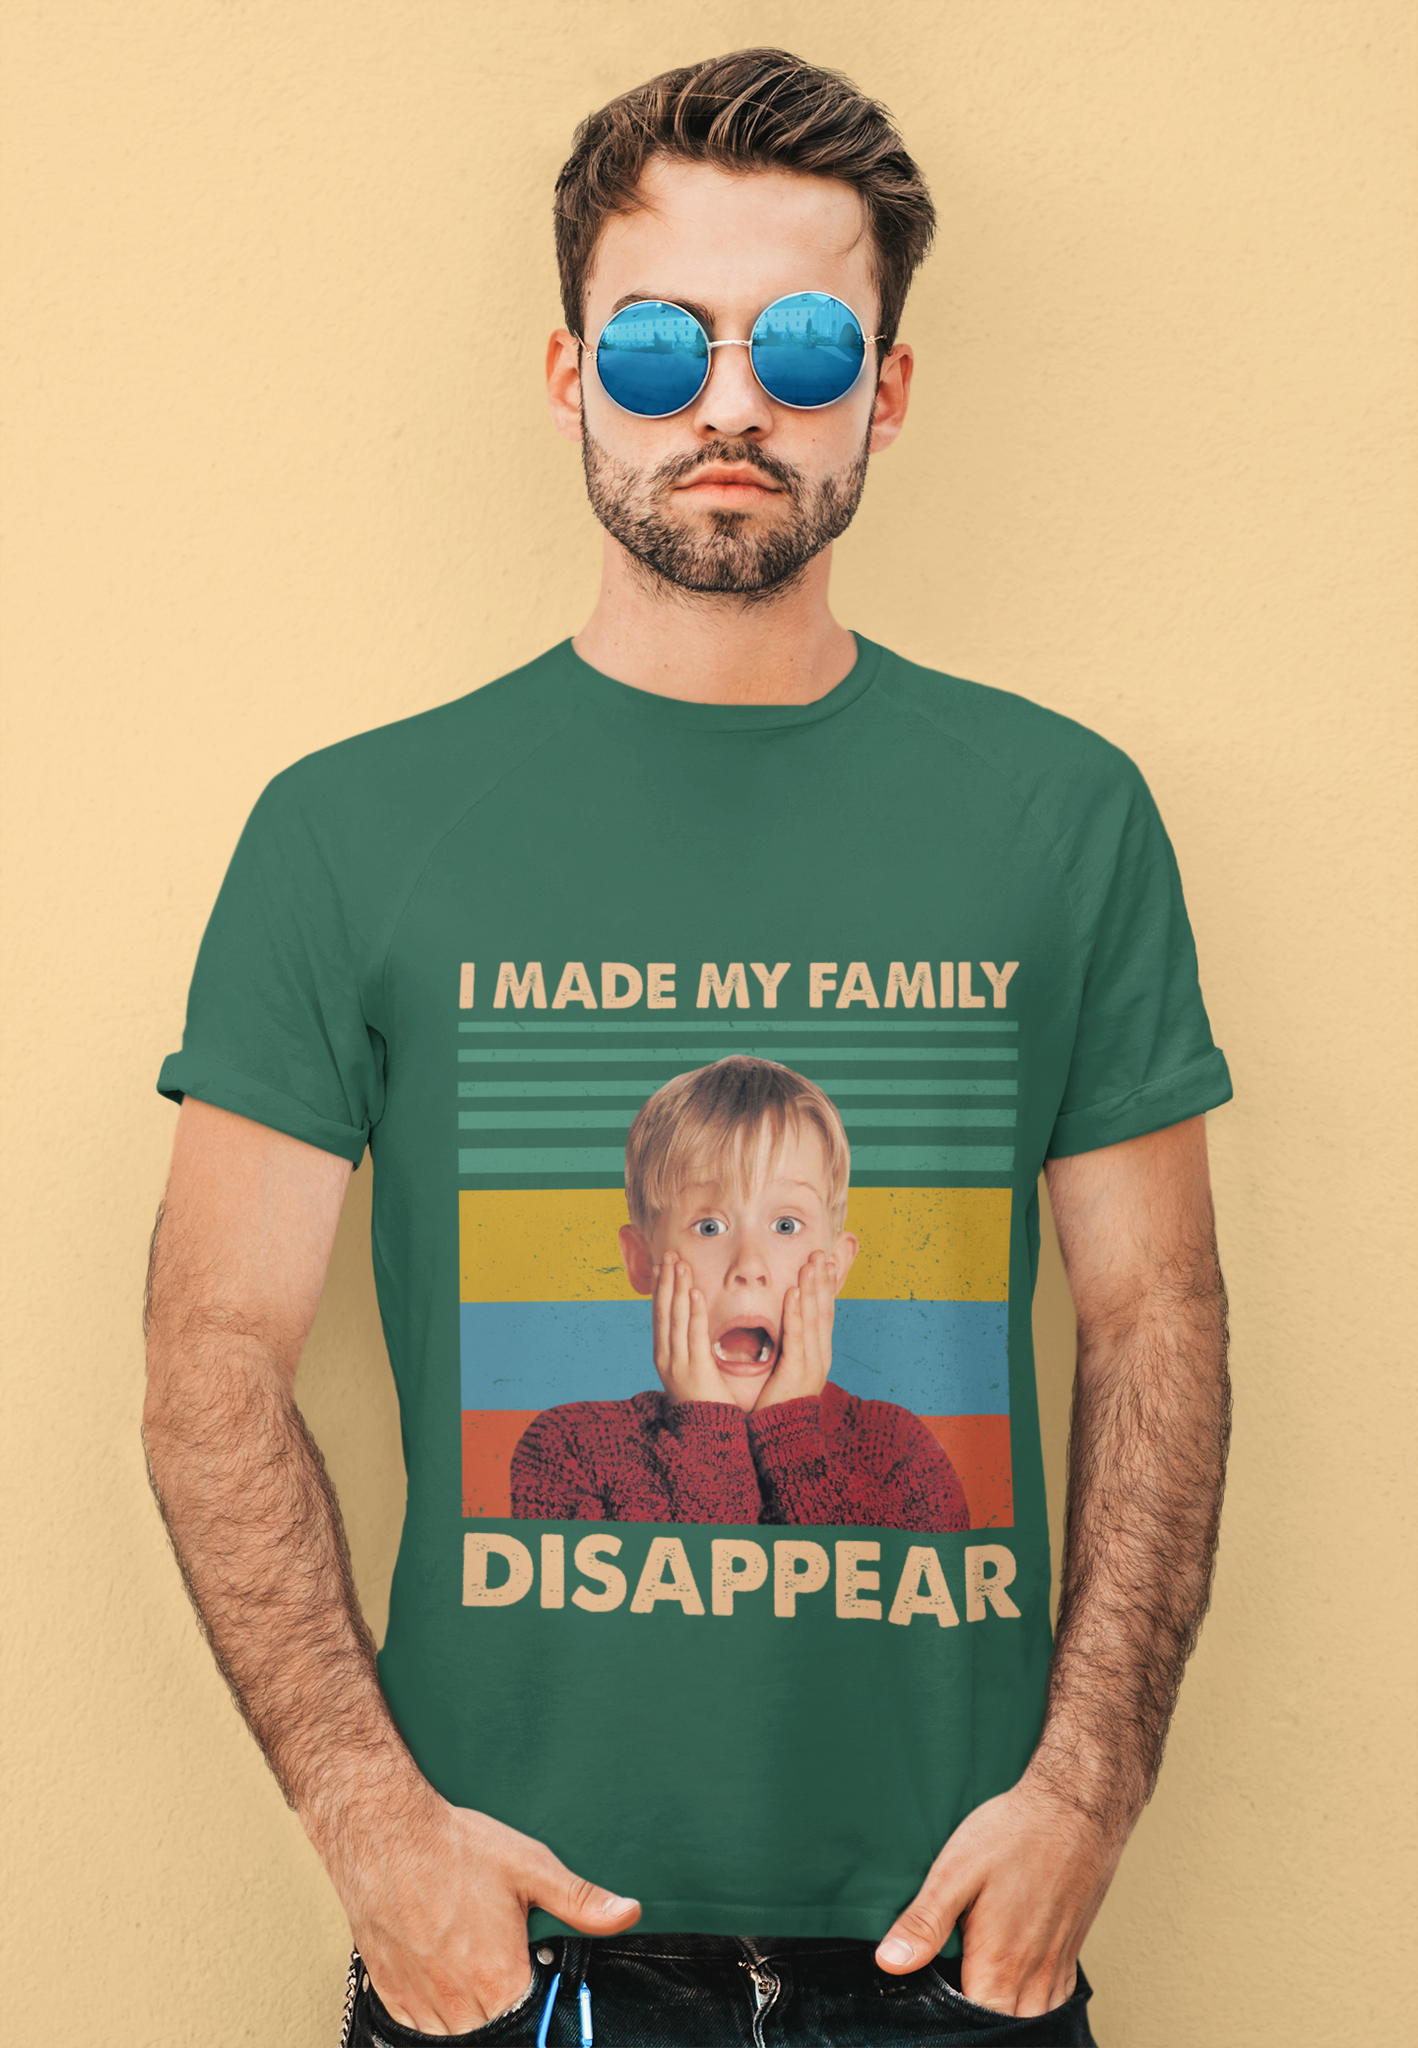 Home Alone Vintage T Shirt, Kevin McCallister Tshirt, I Made My Family Disappear Shirt, Christmas Gifts